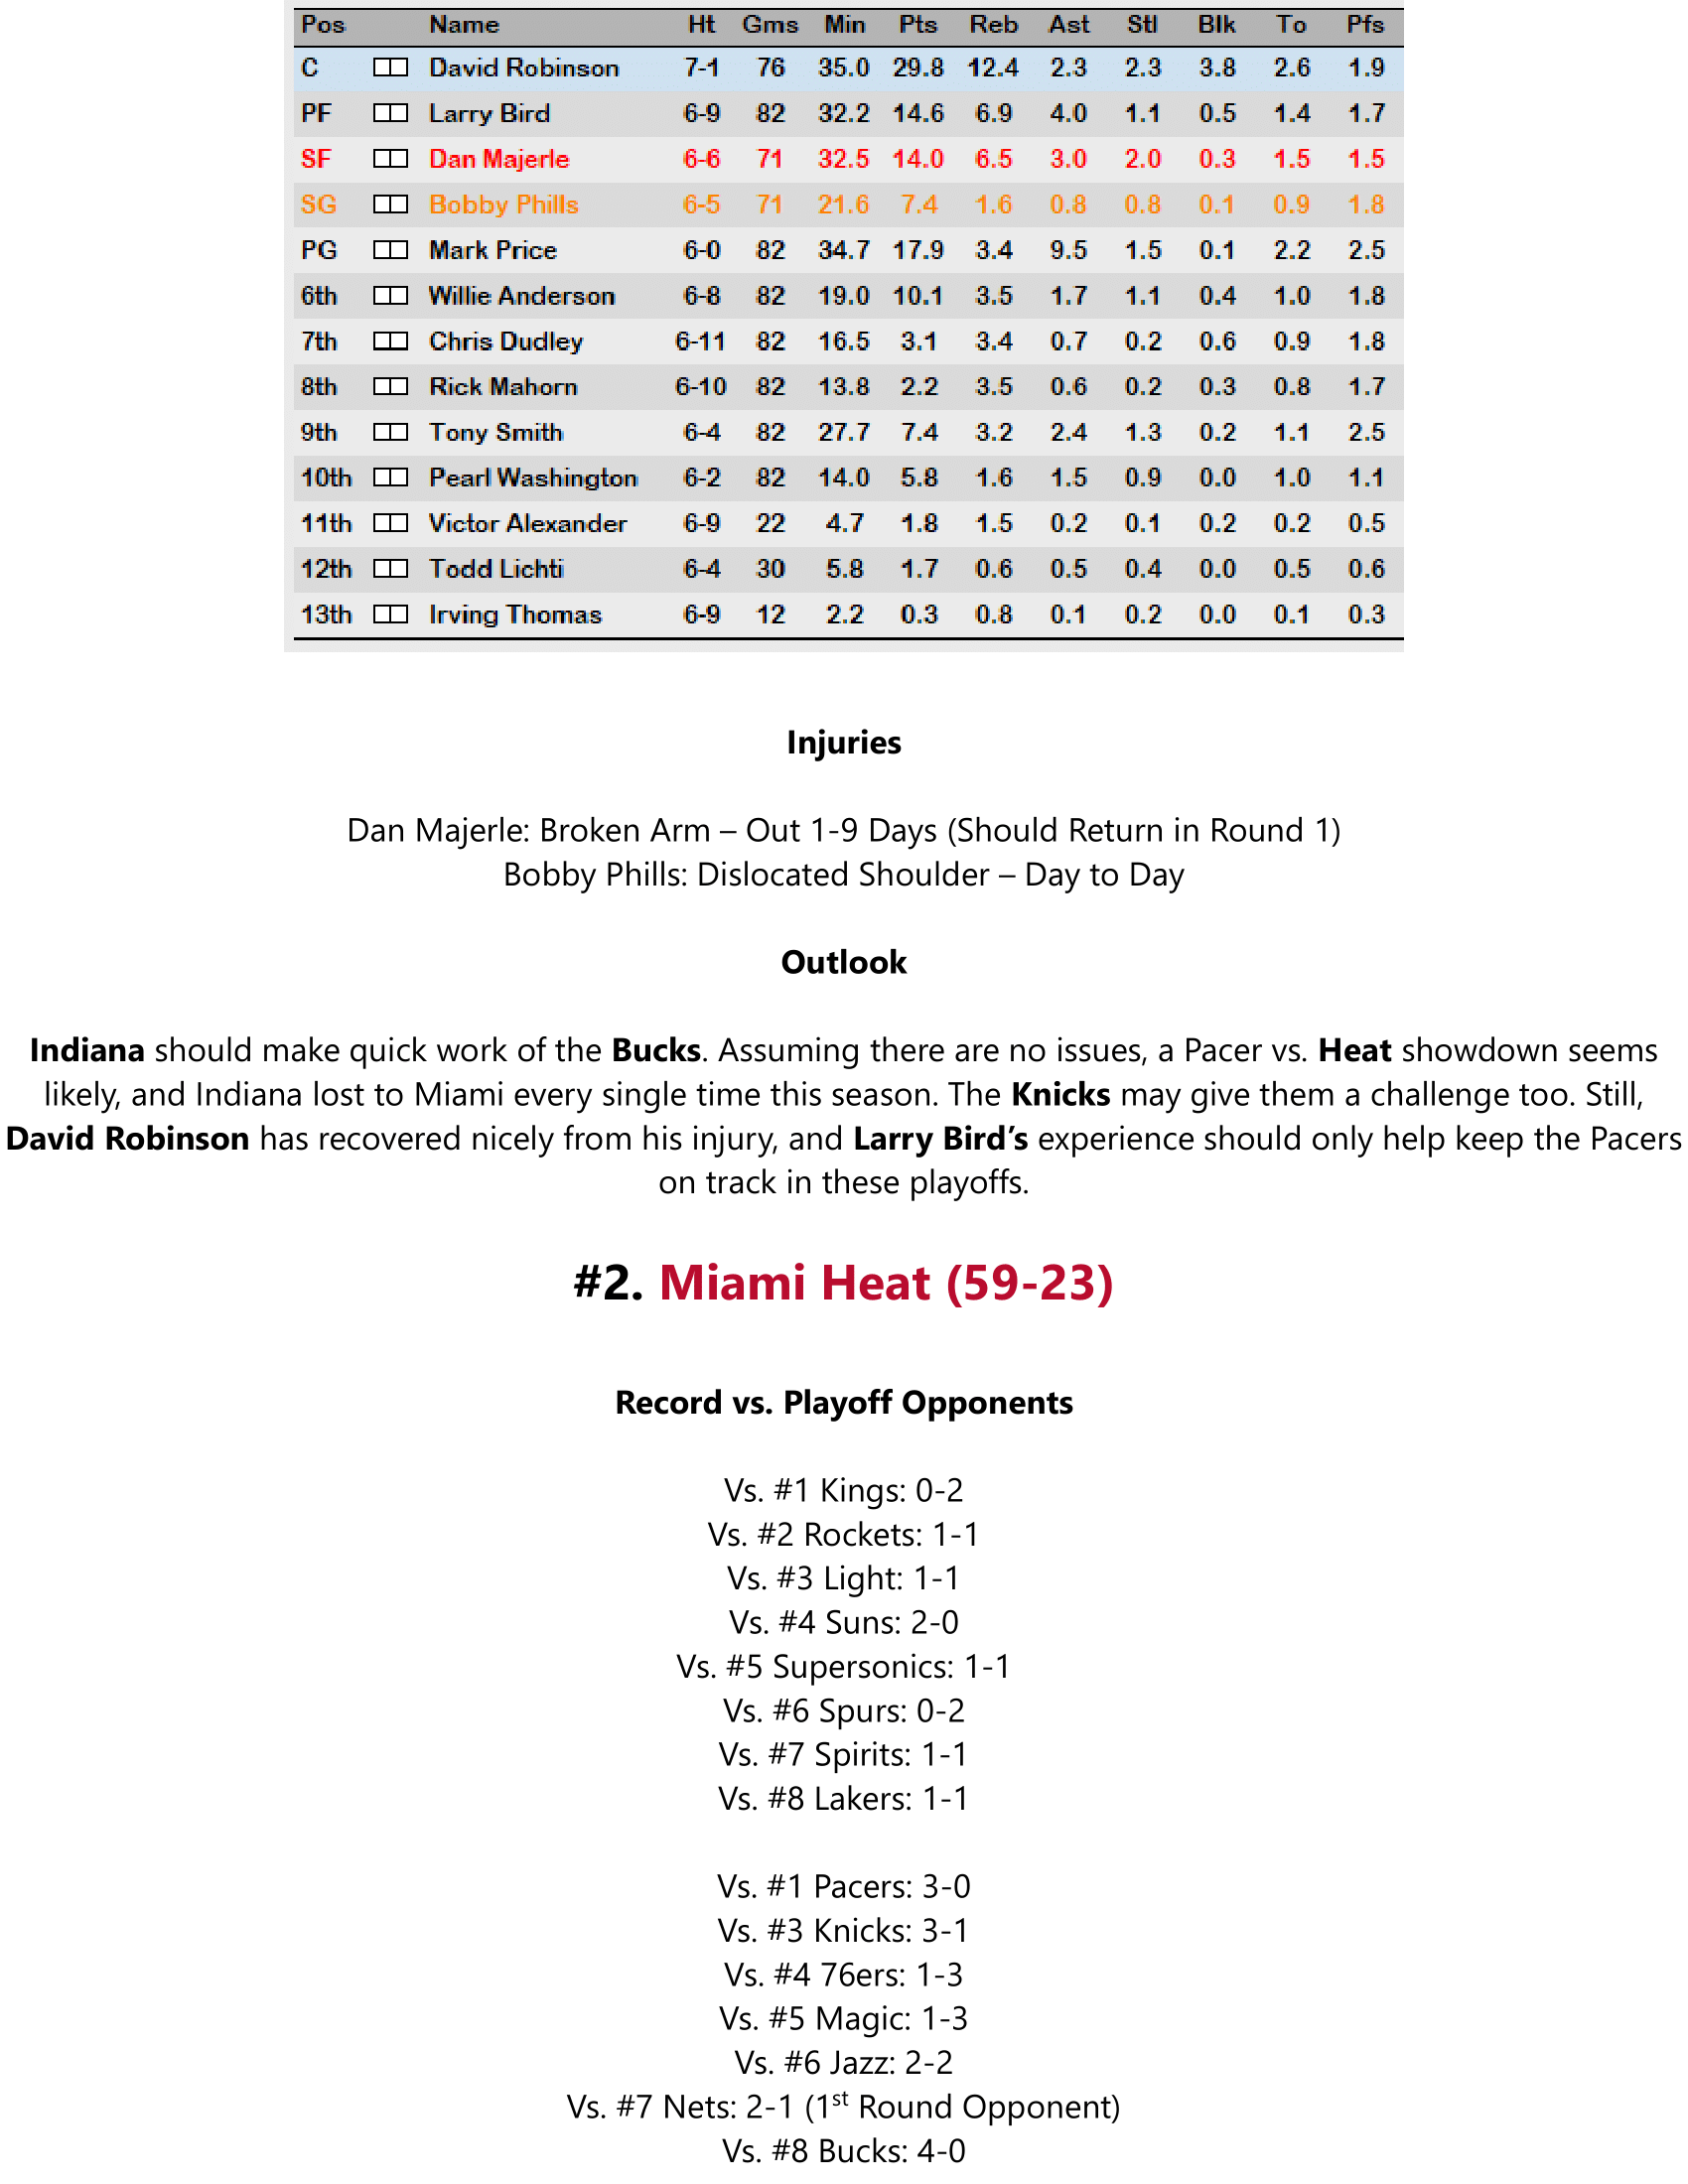 91-92-Part-4-Playoff-Preview-15.png